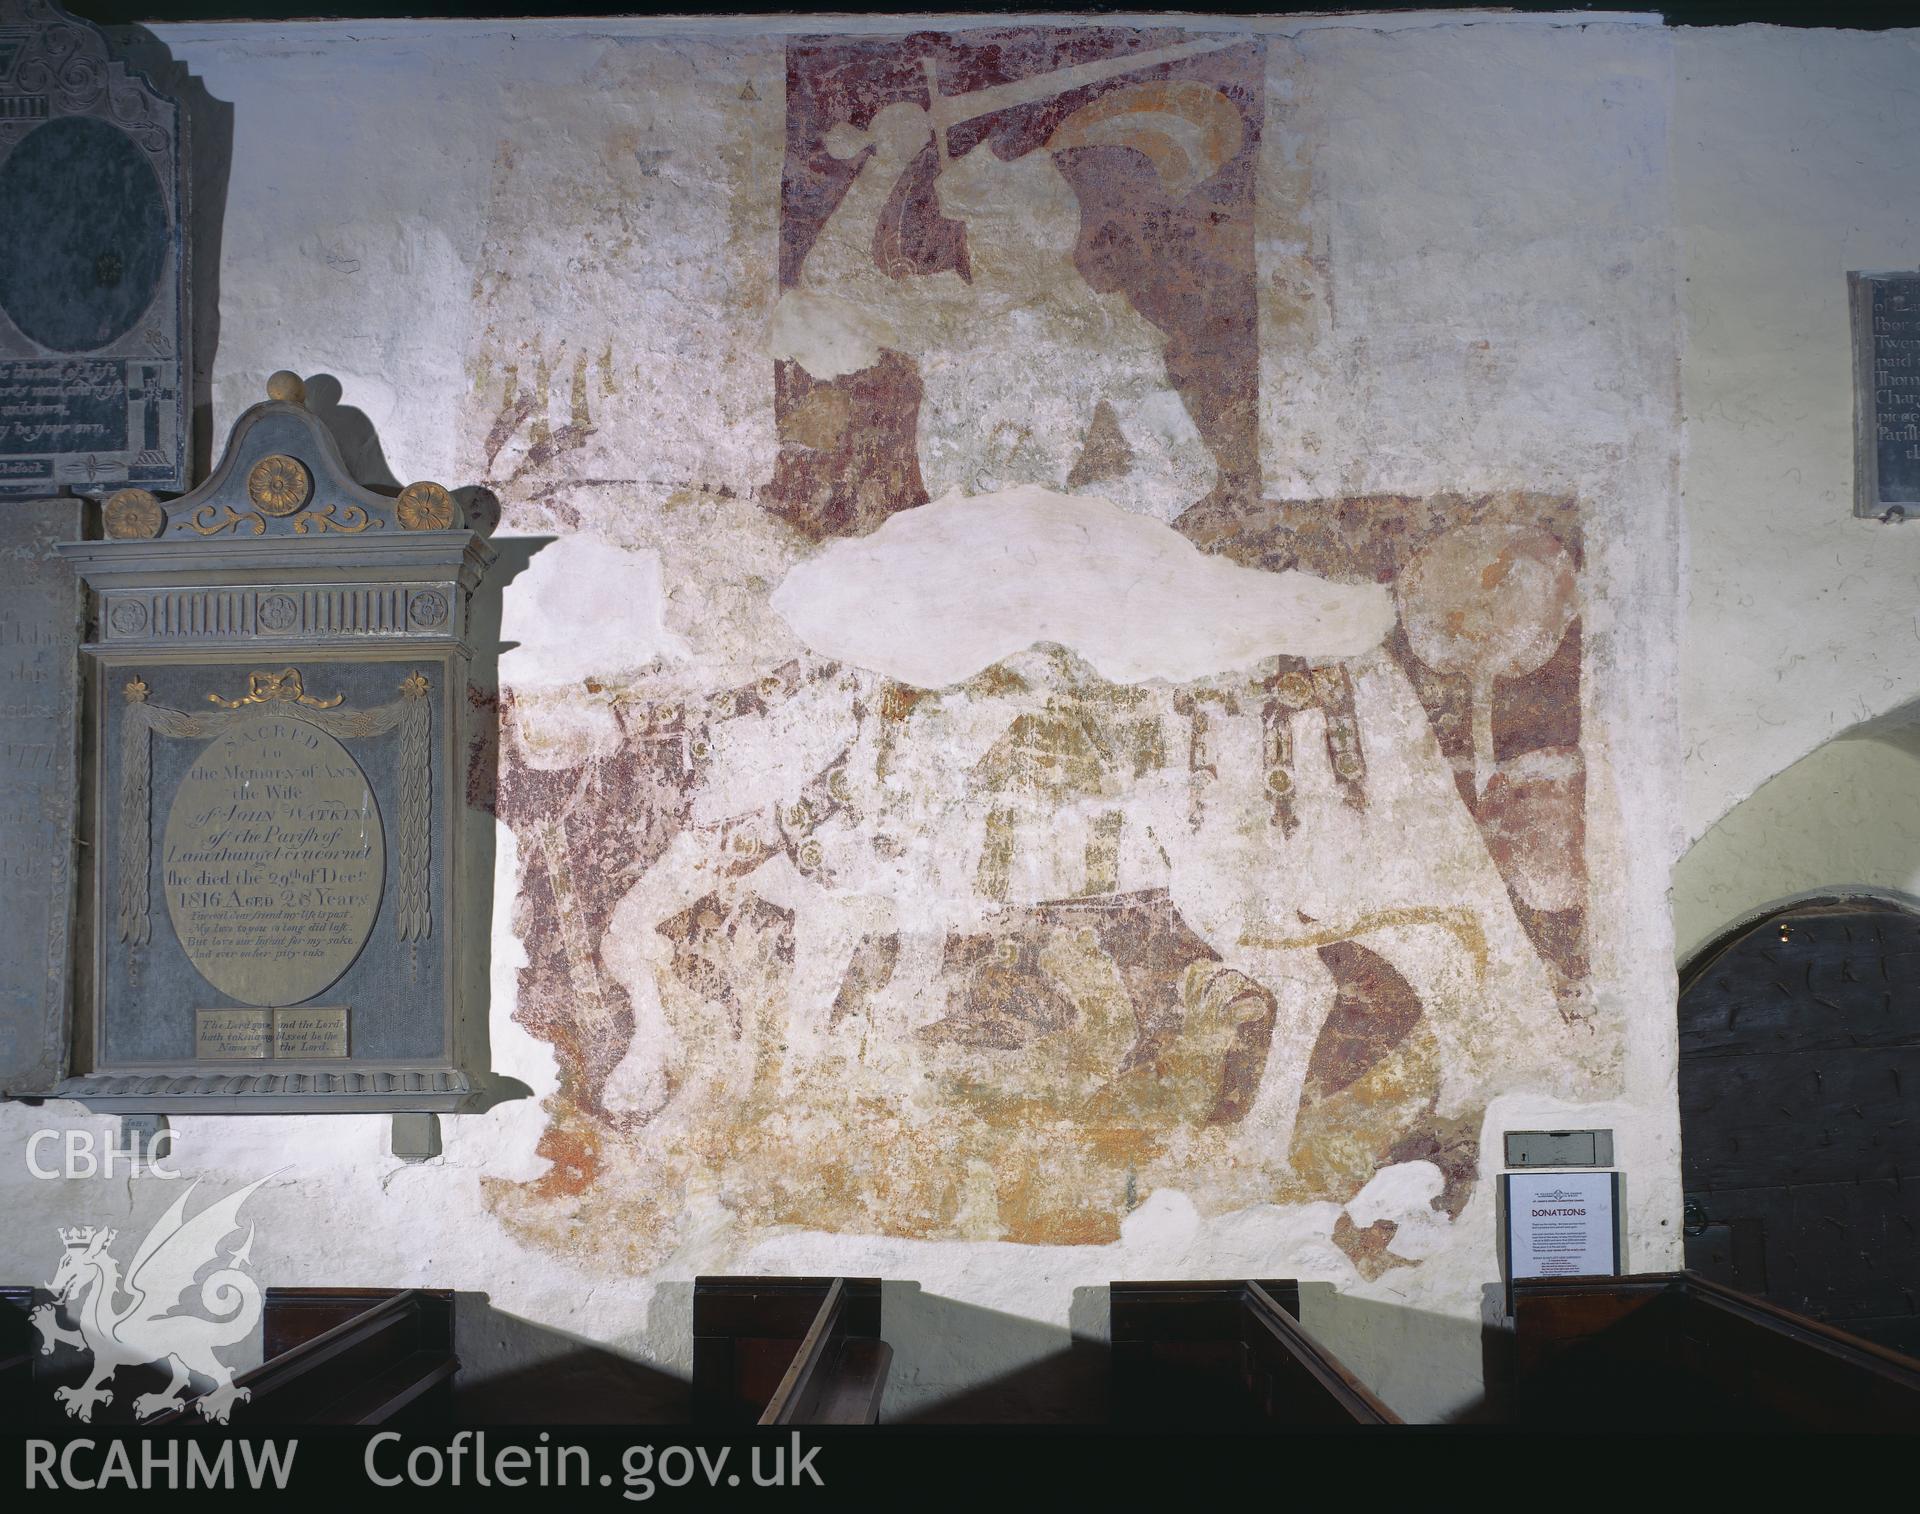 RCAHMW colour transparency showing wallpainting of St George in St Cadoc's Church, Llangattock Lingoed.